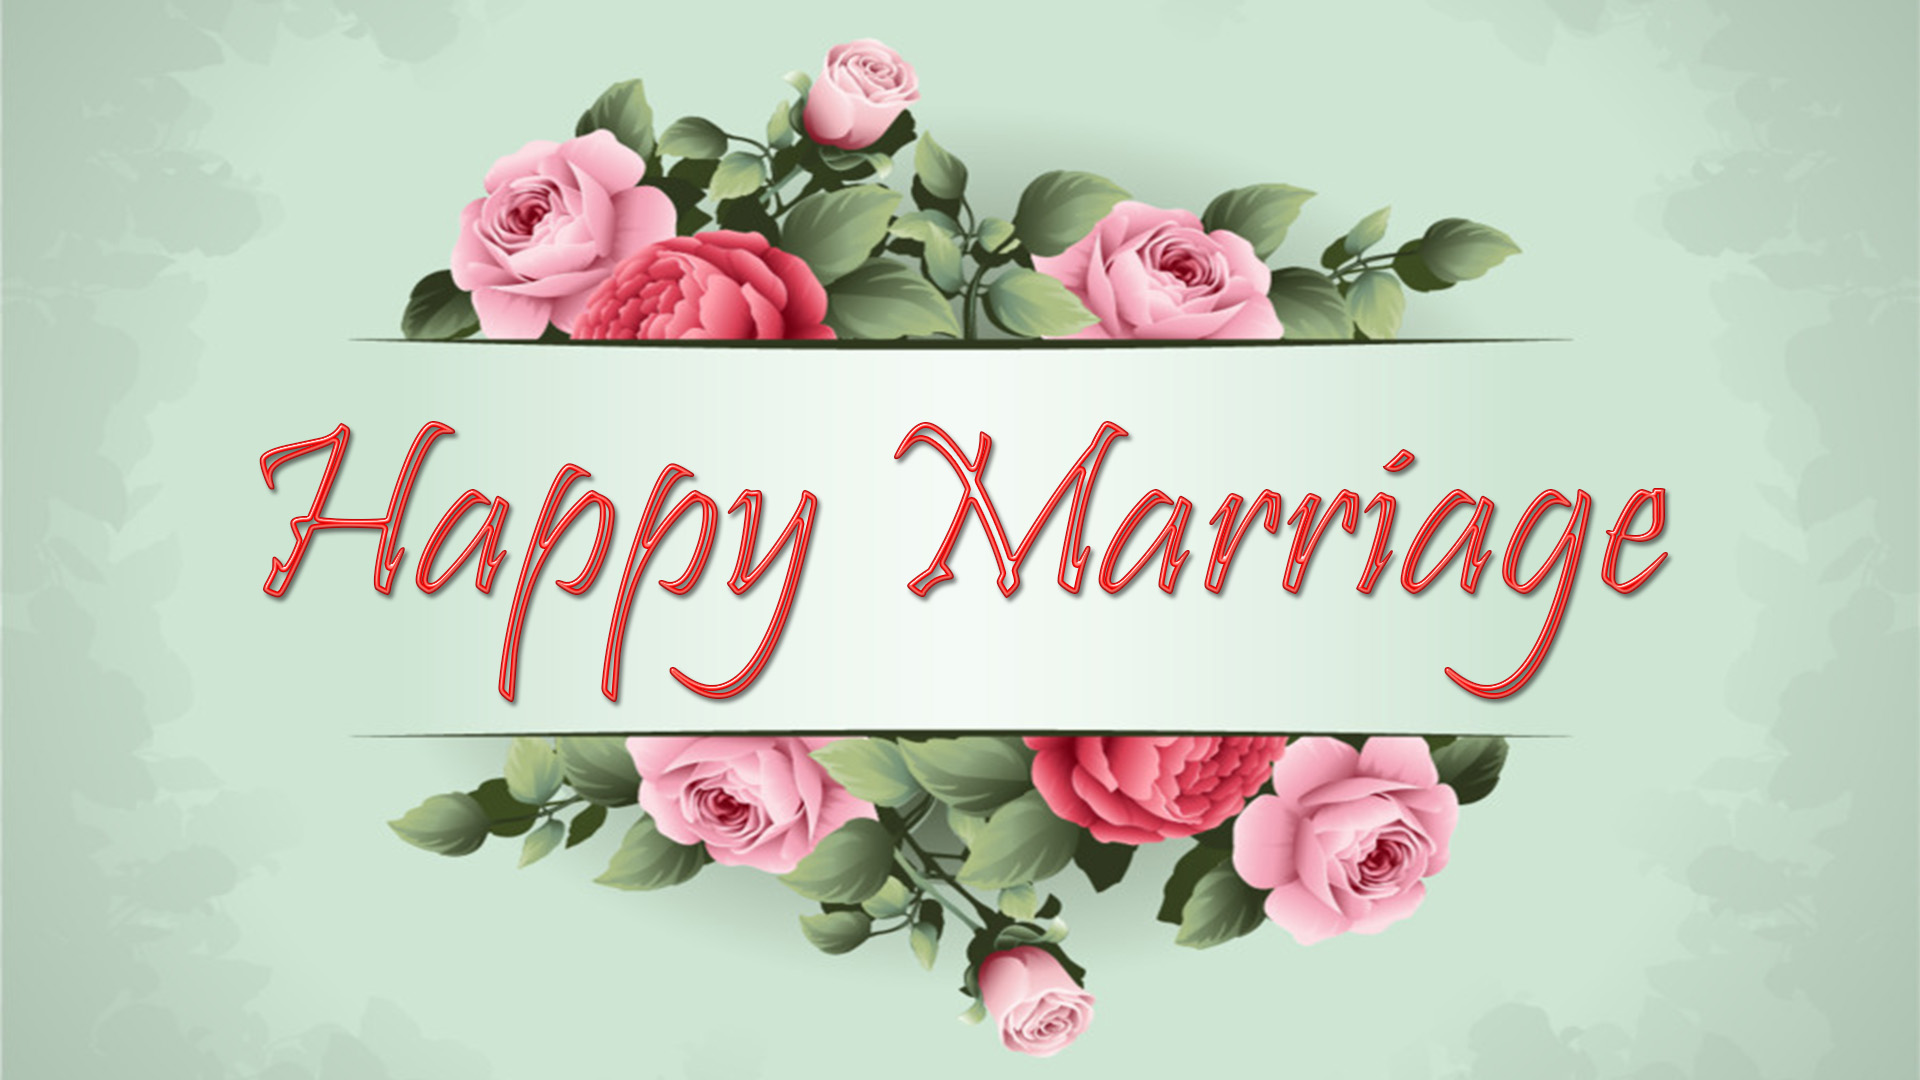 Happy Marriage Image, Picture & HD Wallpaper 2018